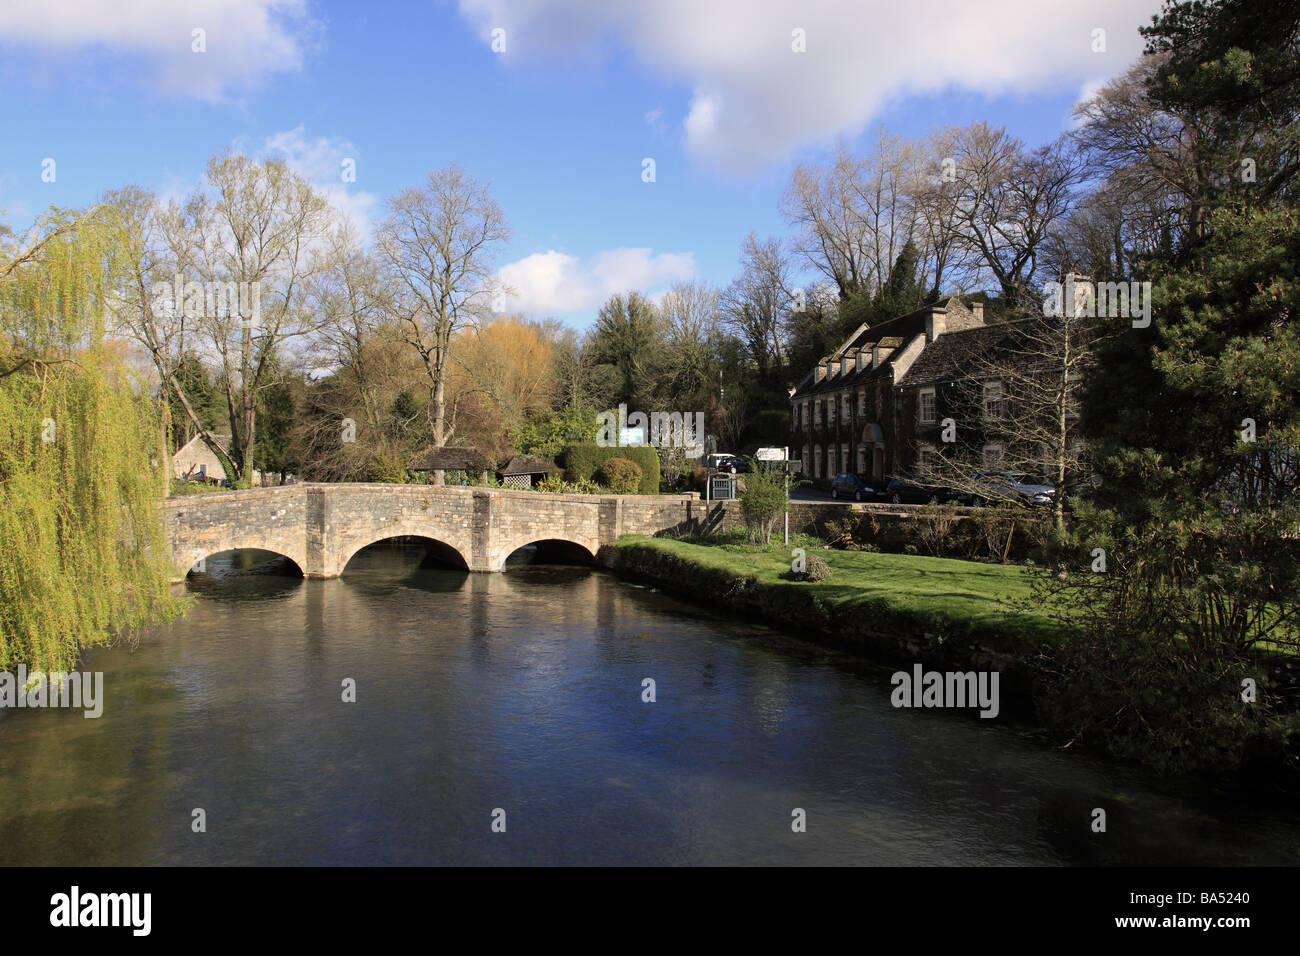 Bridge over the River Coln in the village of Bibury, The Cotswolds, Gloucestershire, England, UK Stock Photo